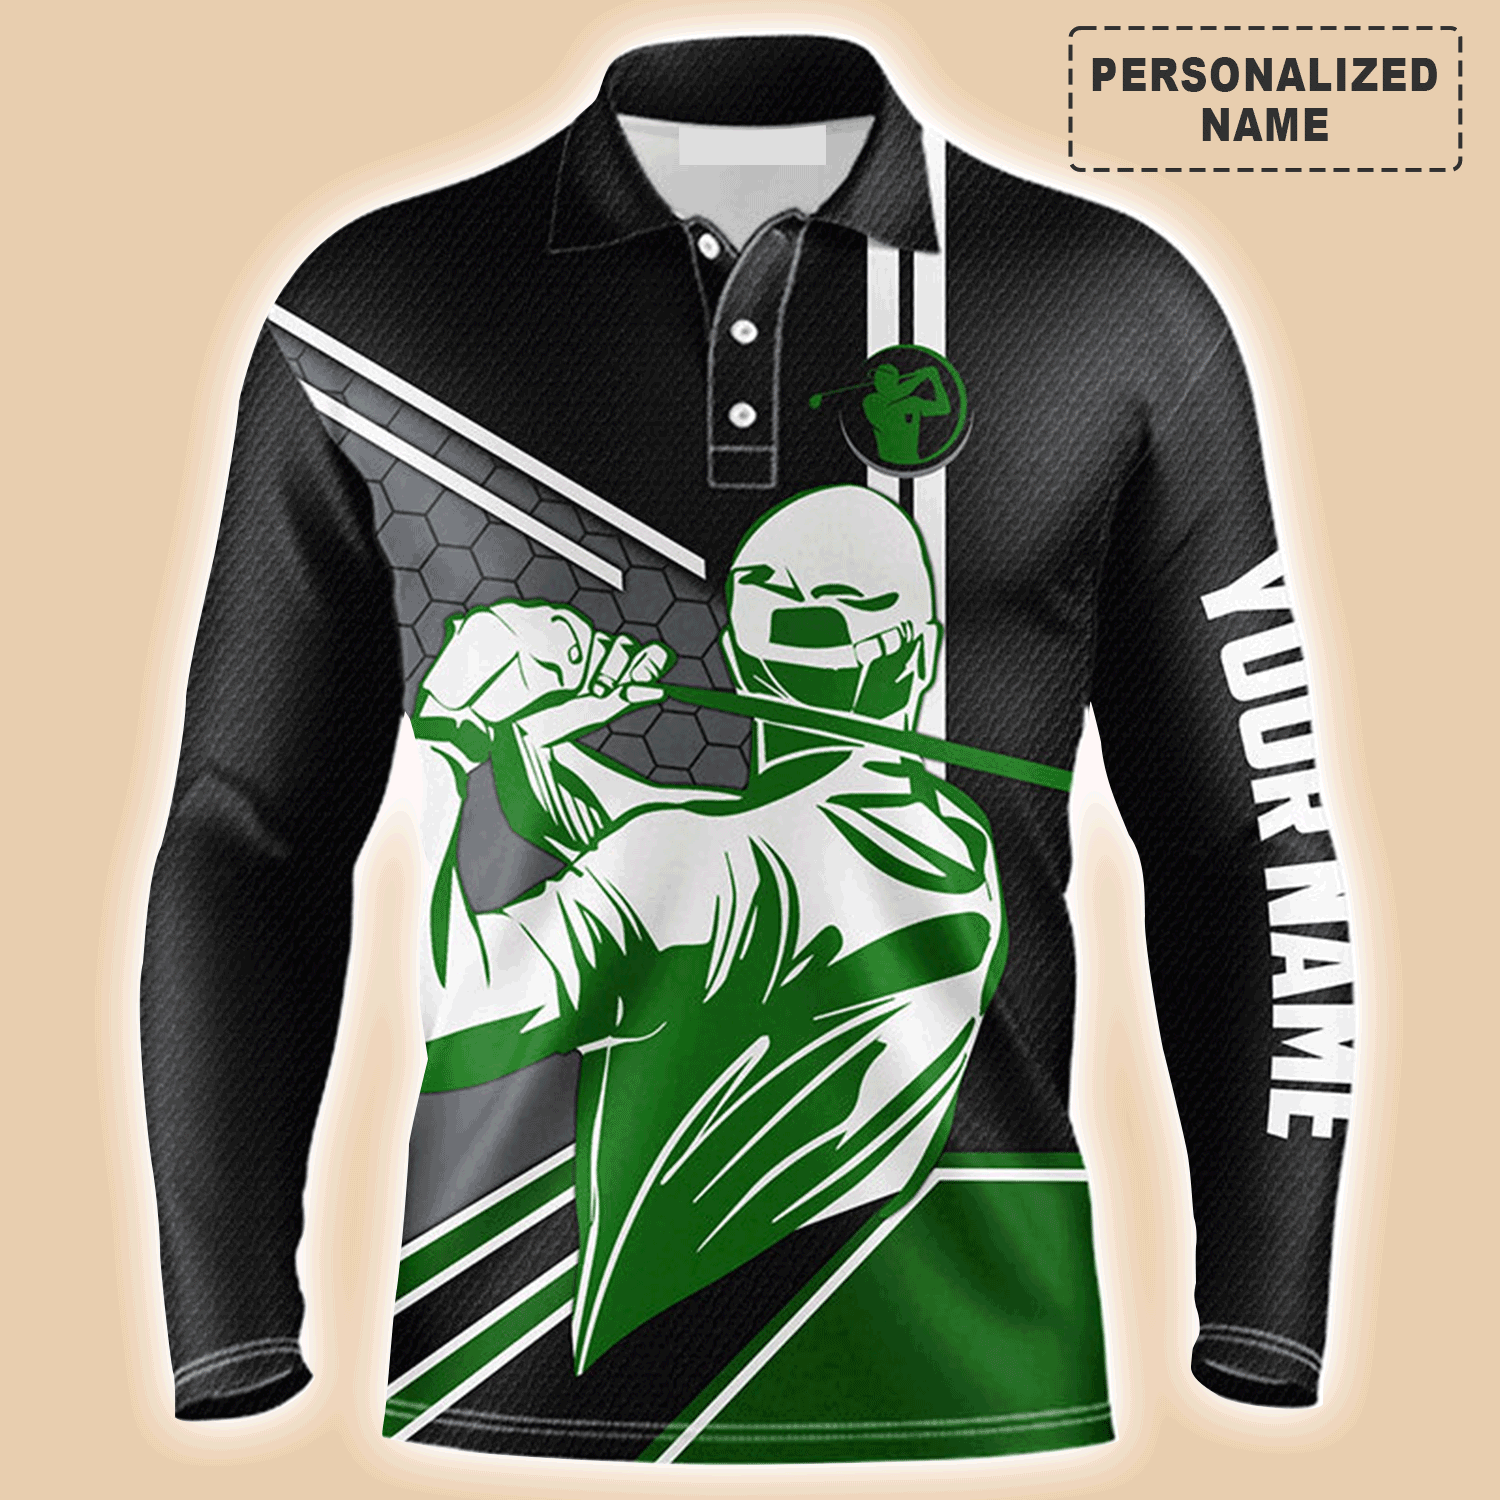 Personalized Name Mens Golfing Black Men Long Sleeve Polo Shirt/ Idea Gift For Golf Lover